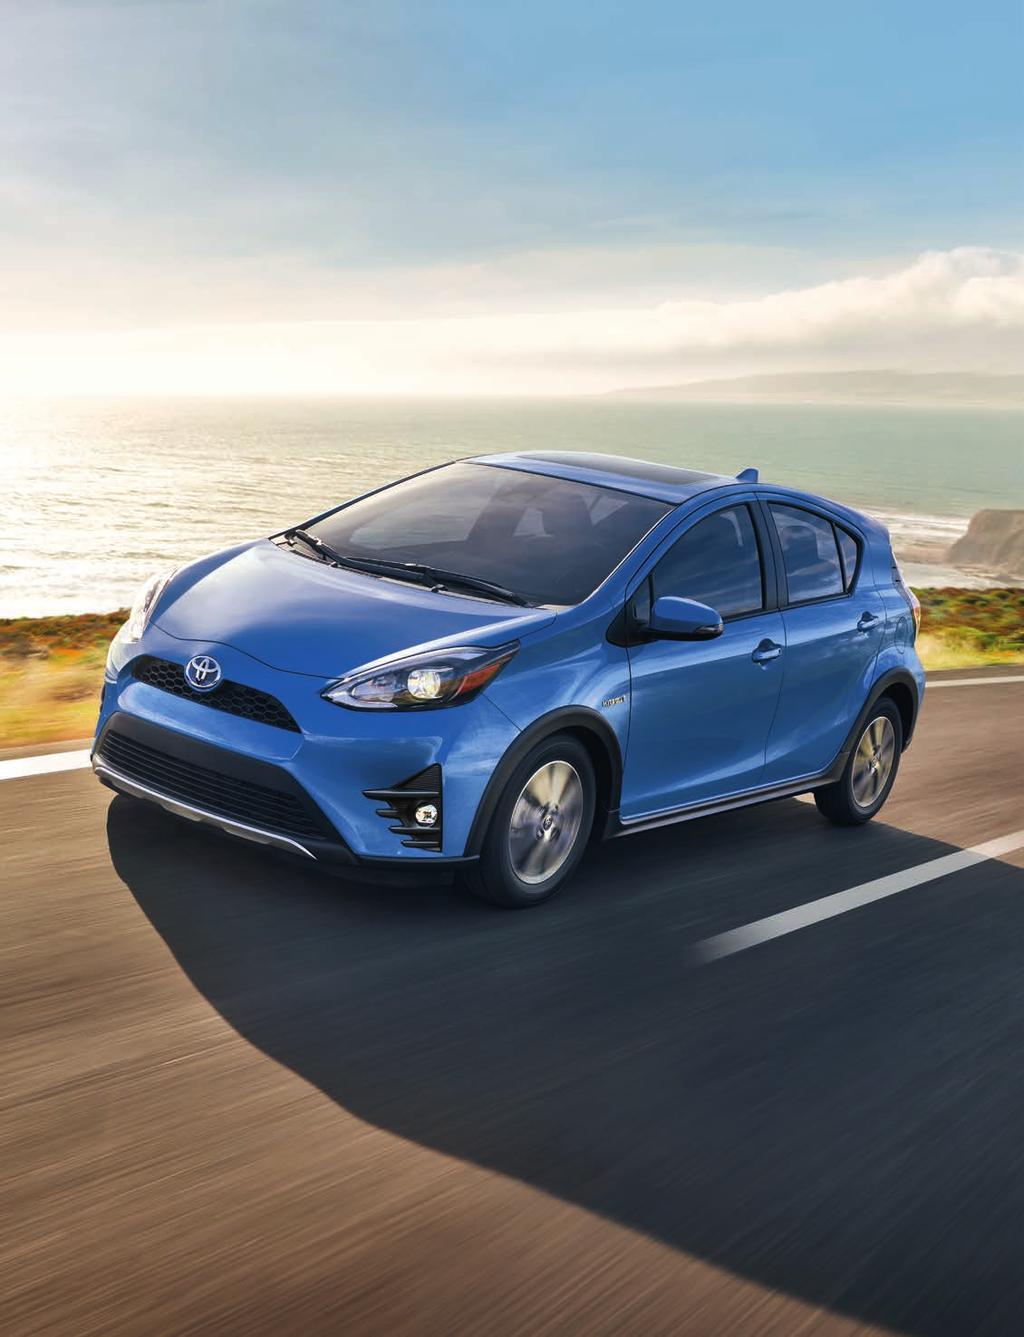 EXPLORE THE POSSIBILITIES IN STYLE ALL THE SPACE YOU NEED. ALL THE STYLE YOU WANT. As the smallest member of the Prius family, the 2019 Prius c makes the most out of every situation.